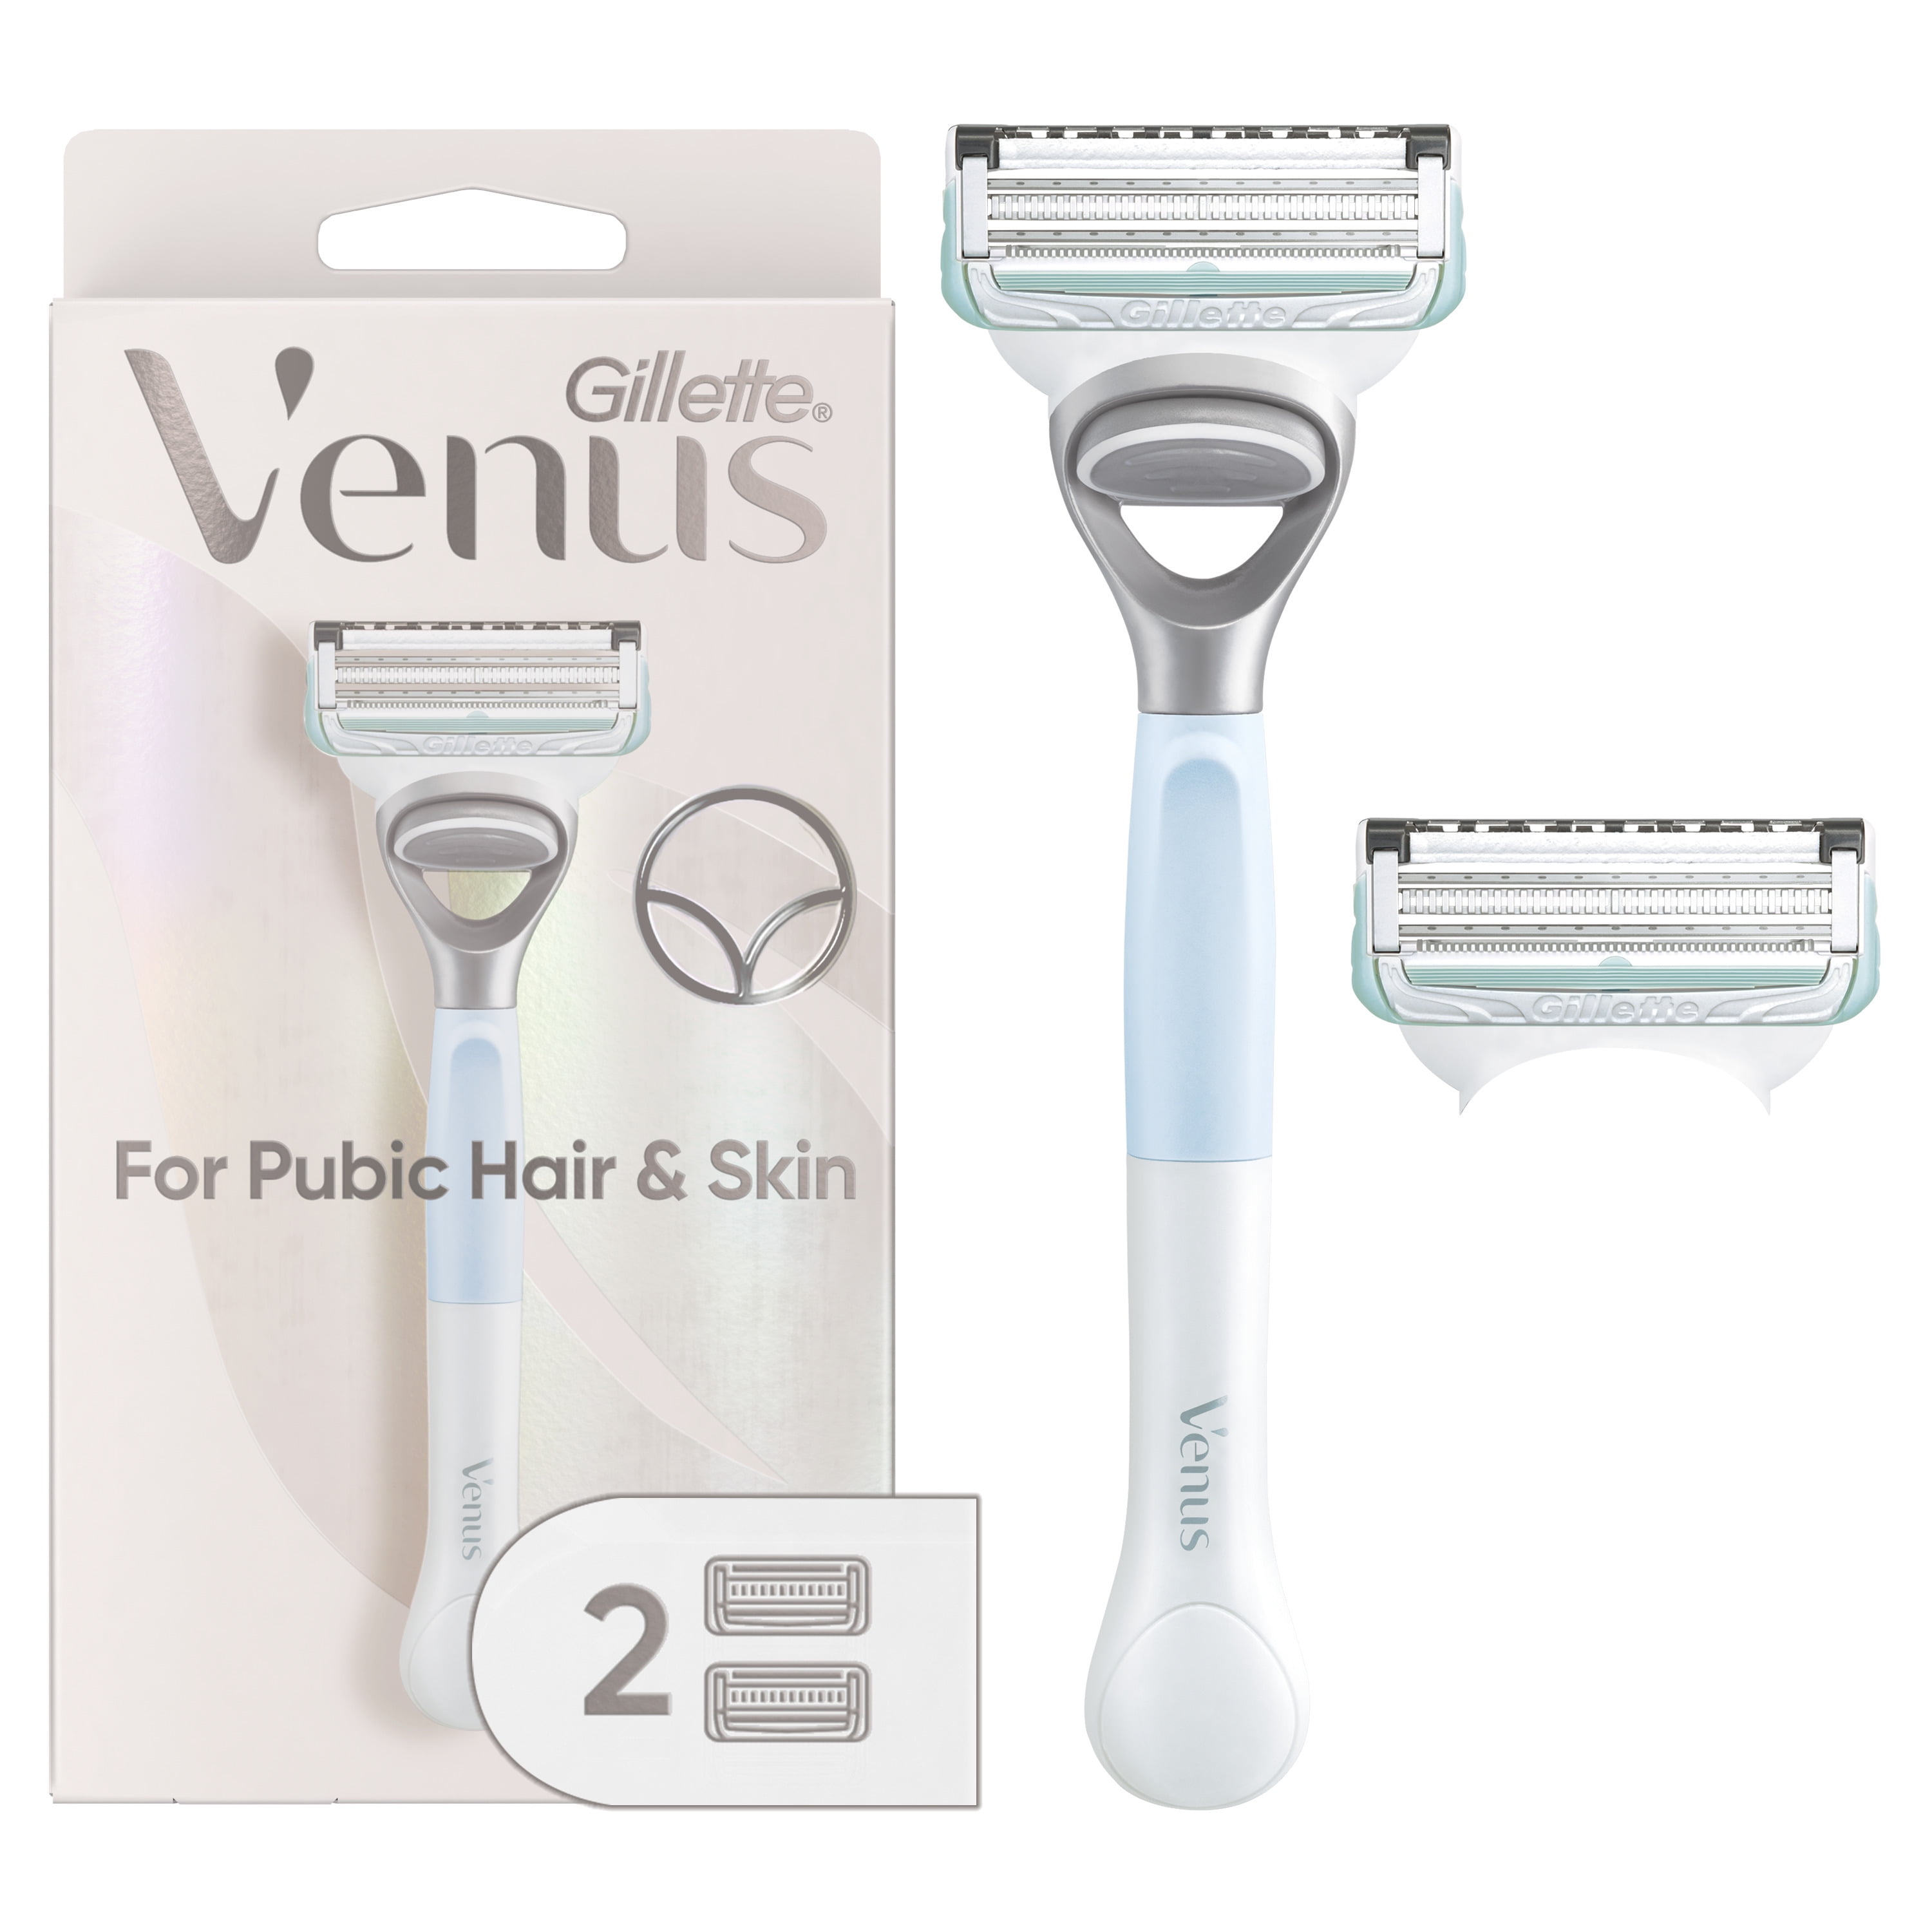 Gillette Venus for Pubic Hair and Skin, Women's Razor Handle and 2